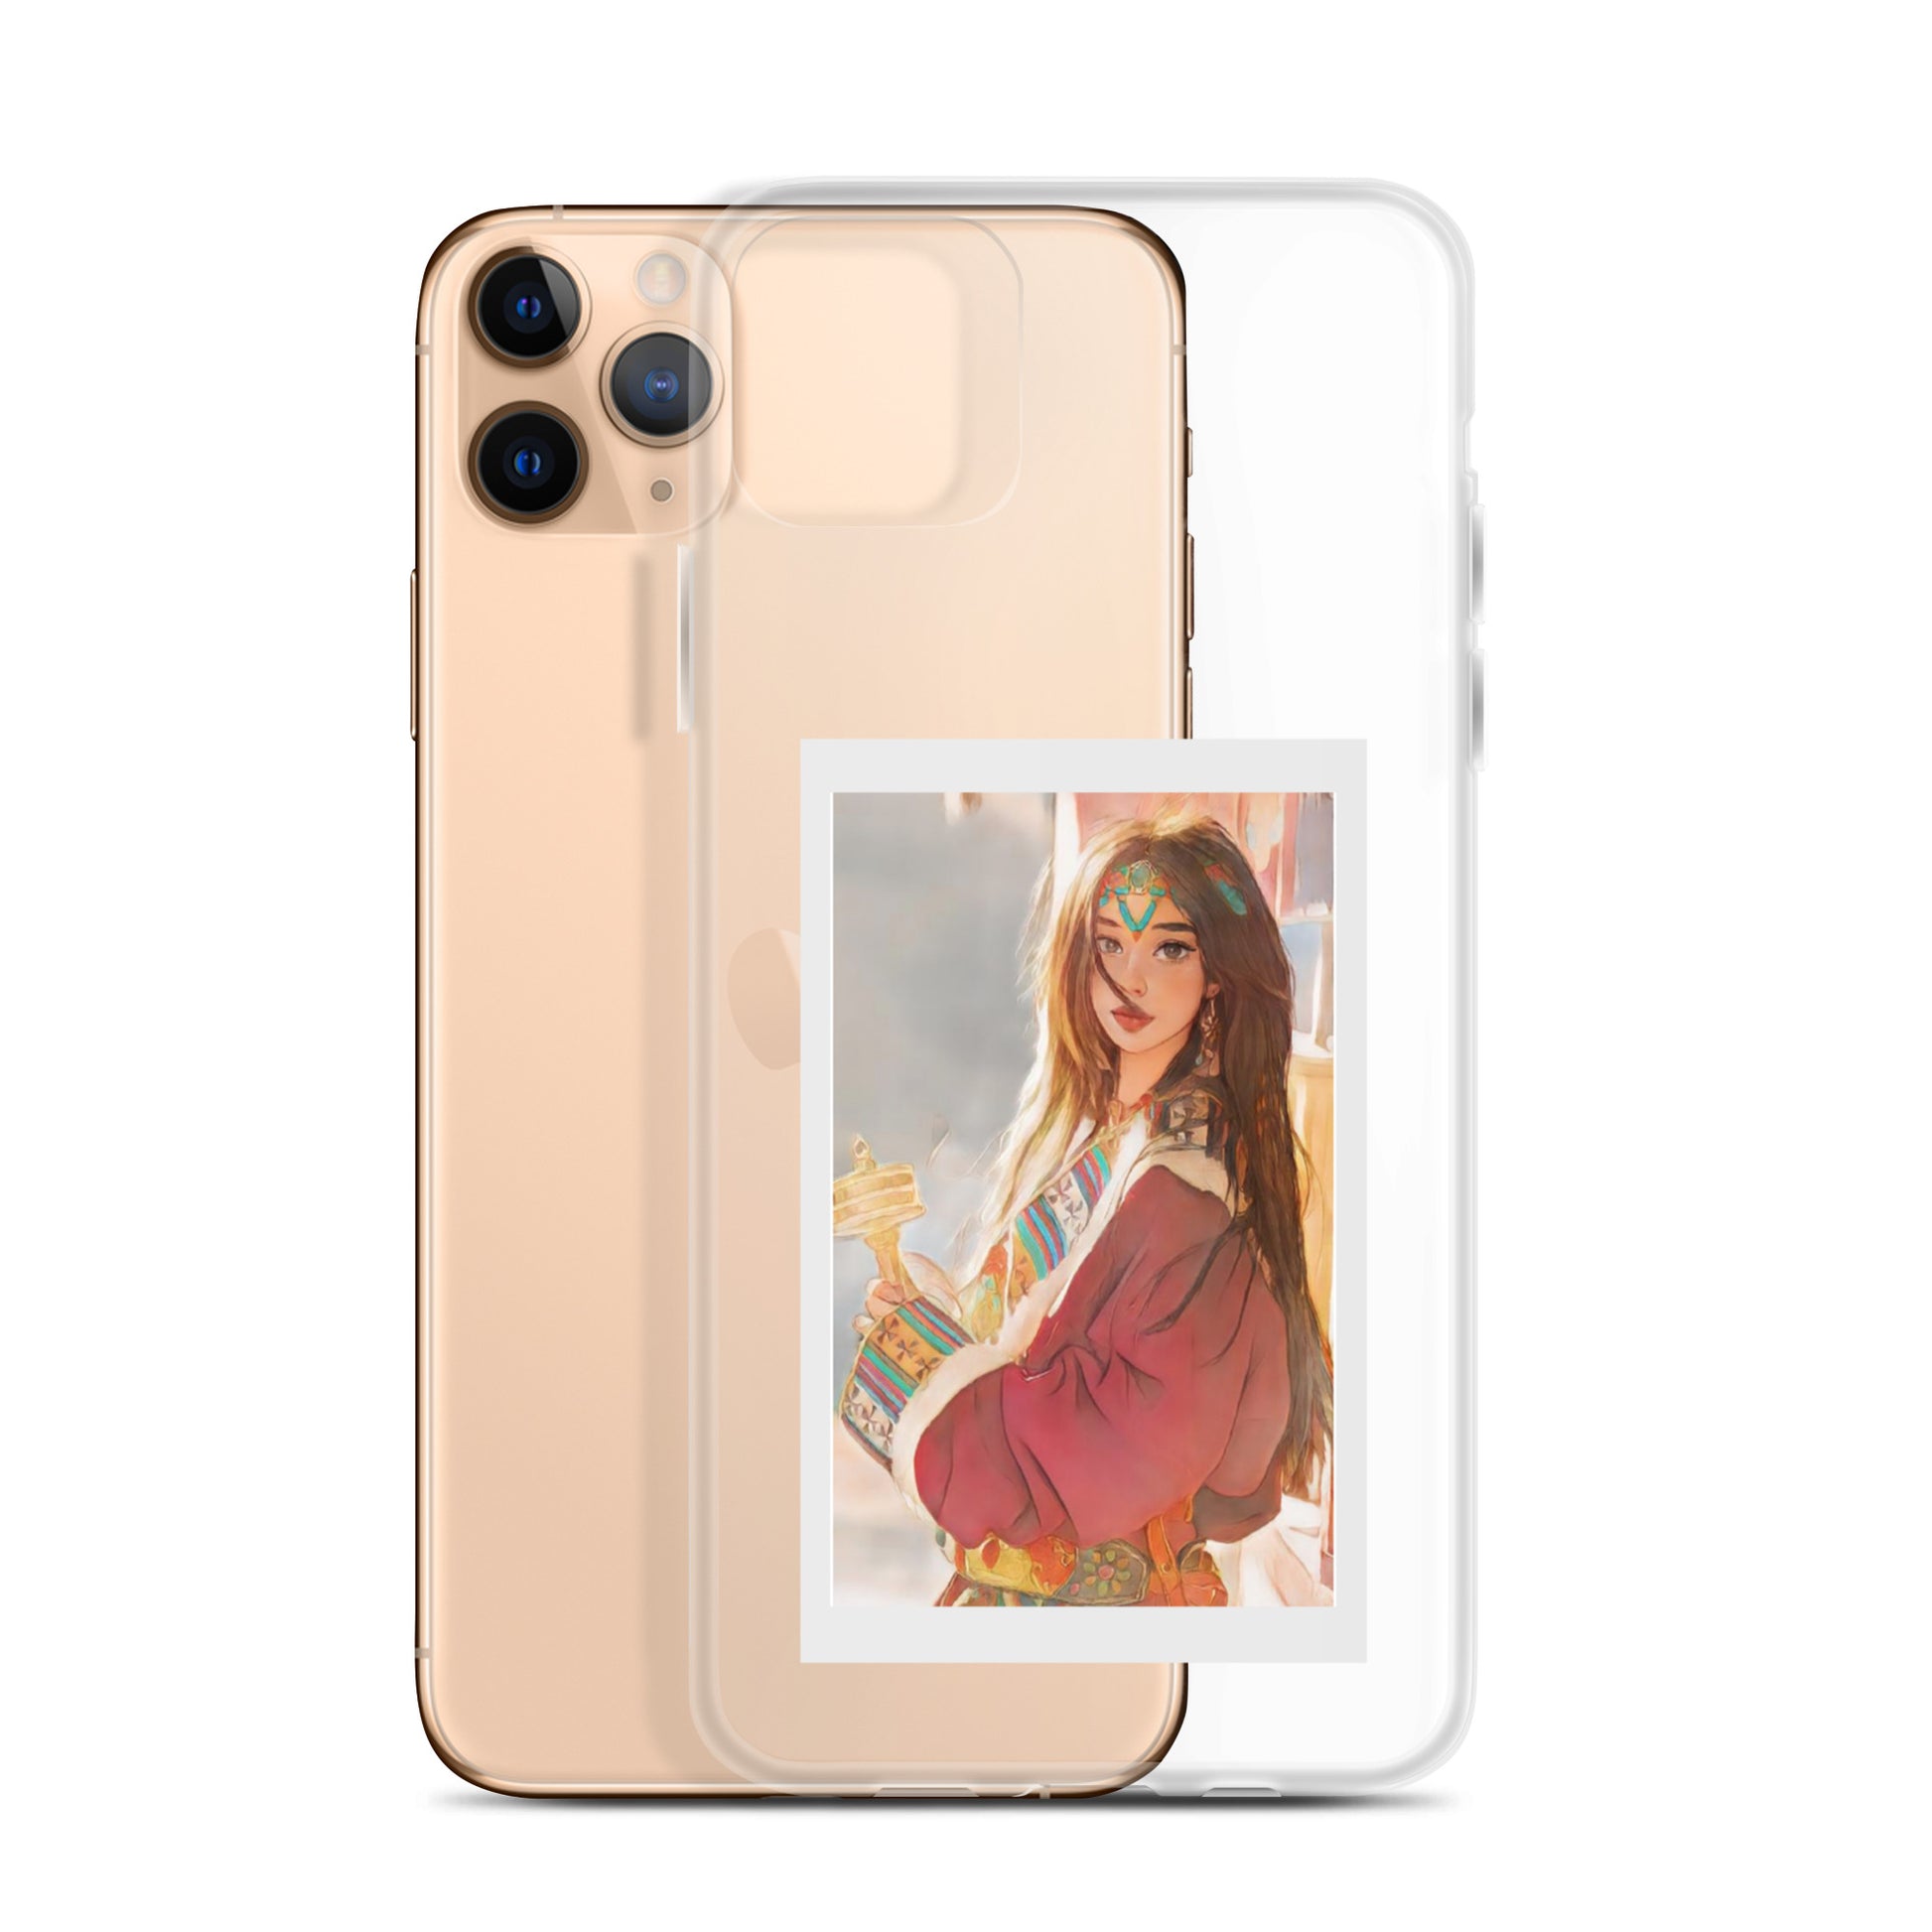 TIBETAN GIRL iPhone CASE are designed under Dzimig Studios' Tibetan Archive Project. This sleek iPhone® case protects your phone from scratches, dust, oil, and dirt.